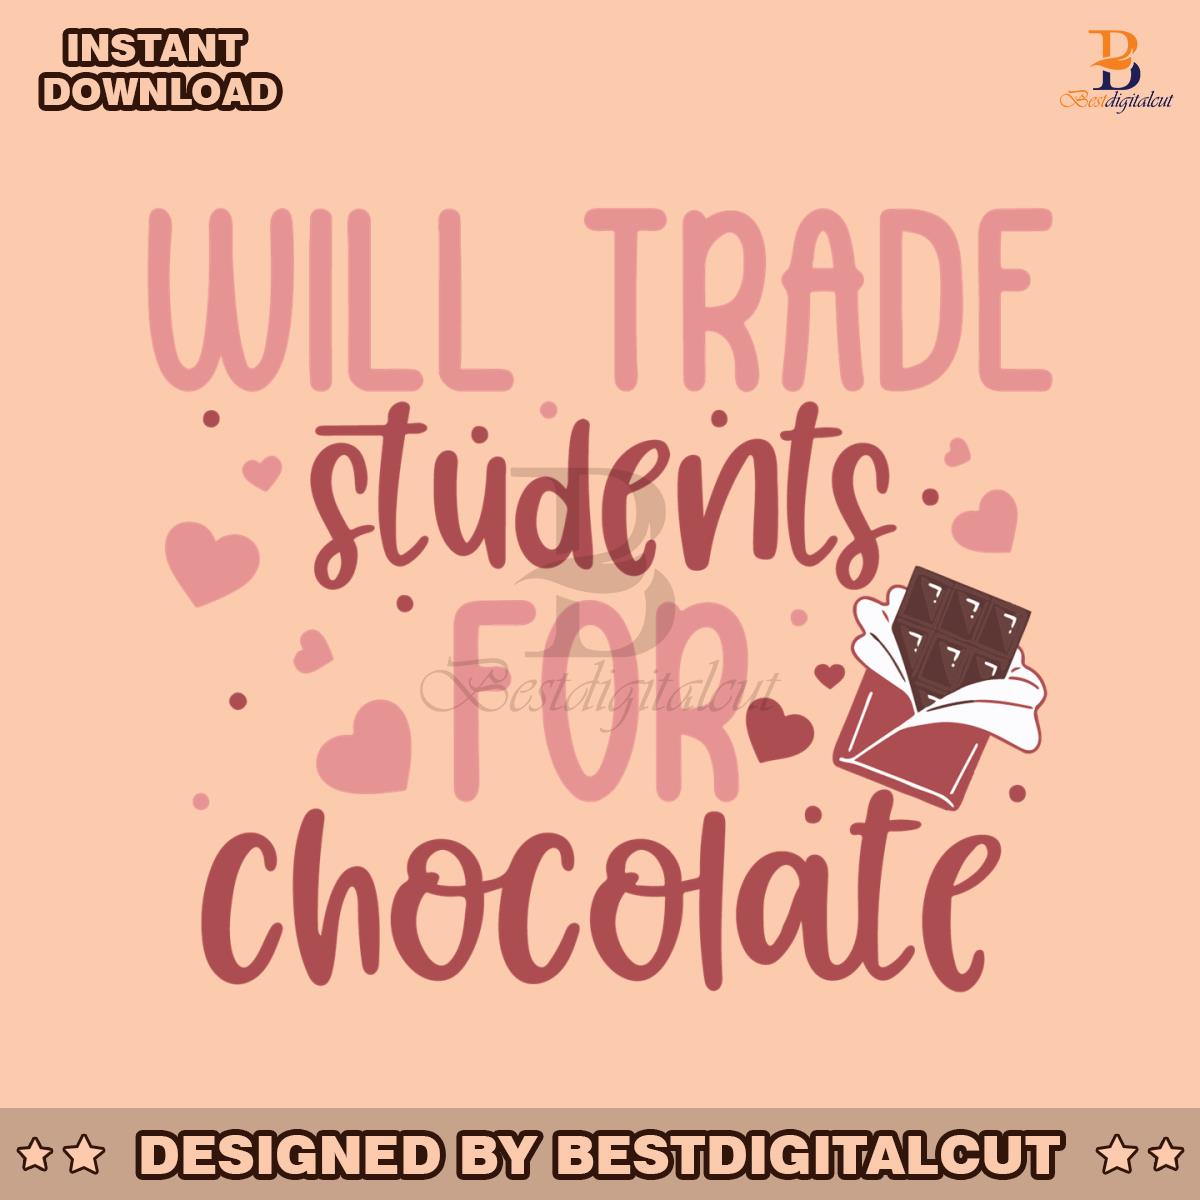 will-trade-students-for-chocolate-svg